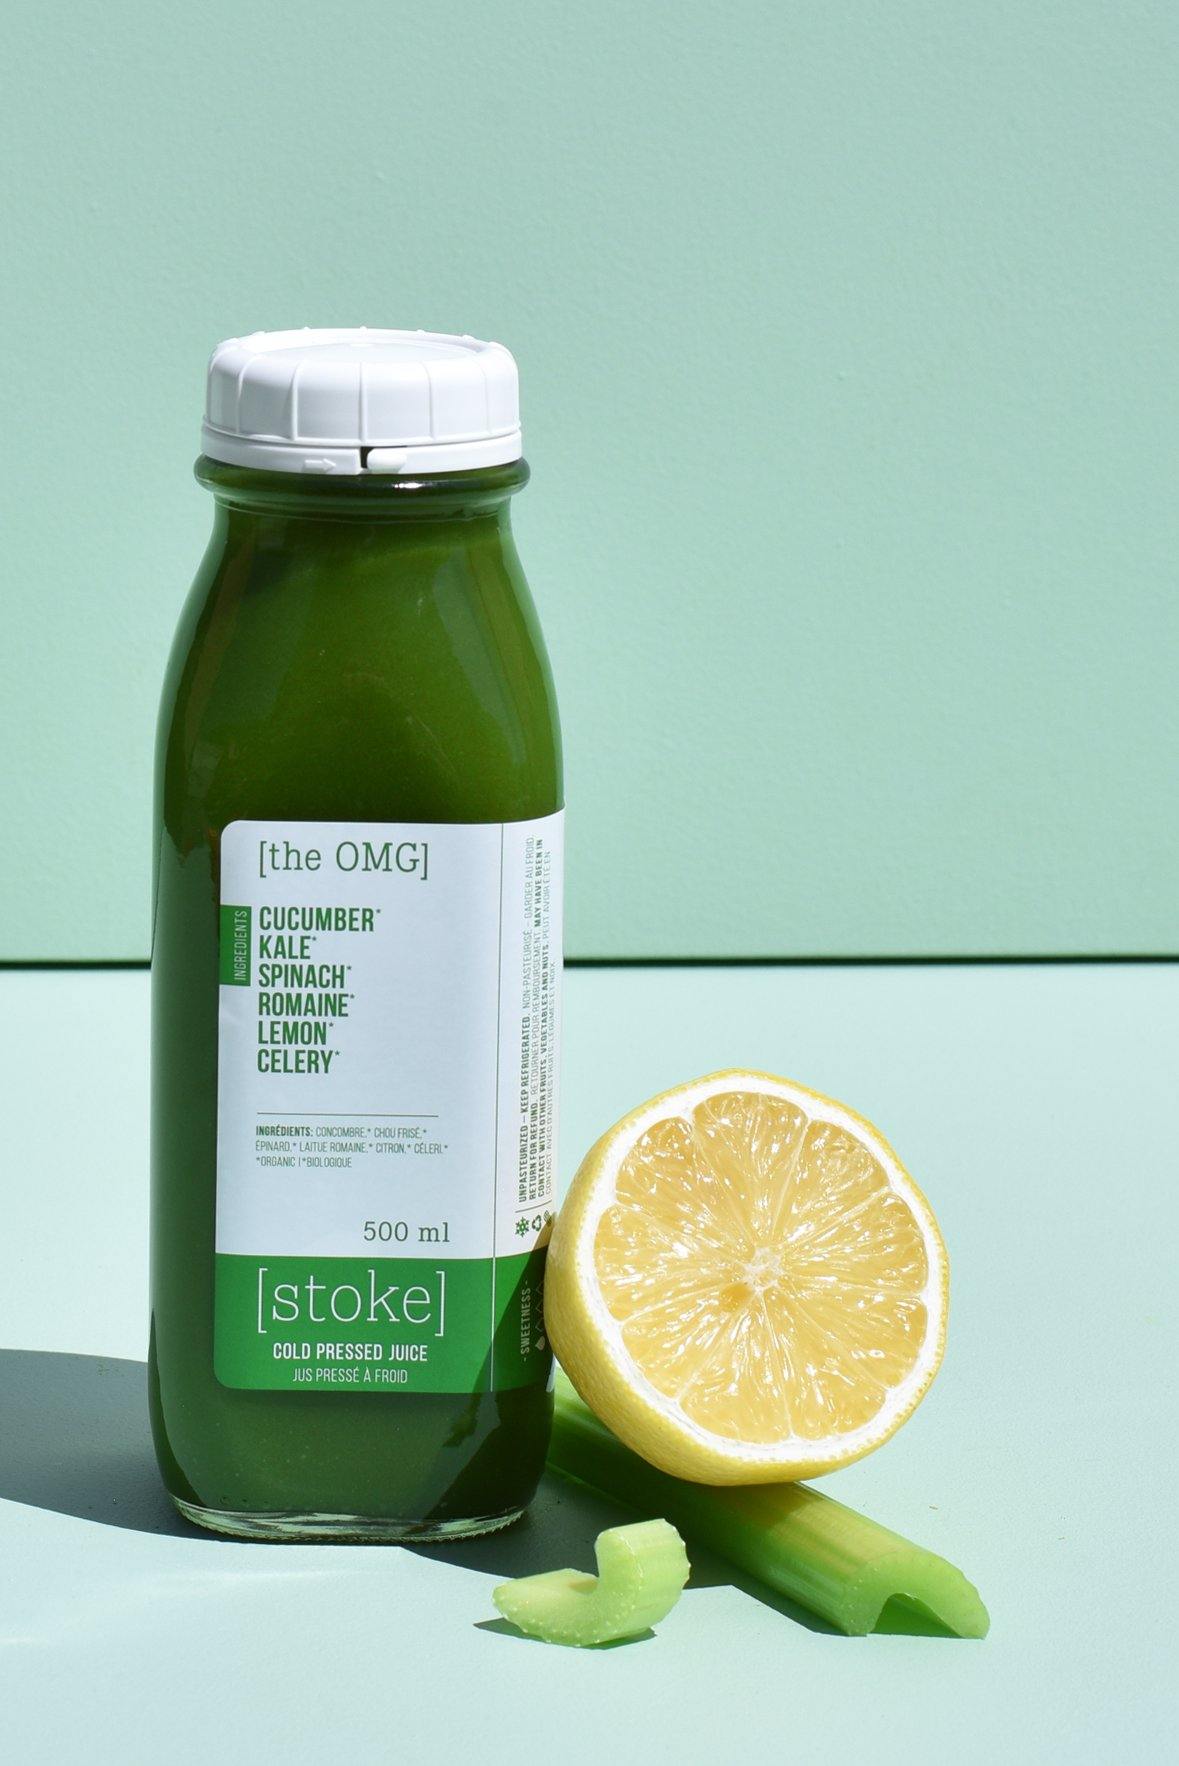 [ the OMG ] cold pressed juice with romaine and kale